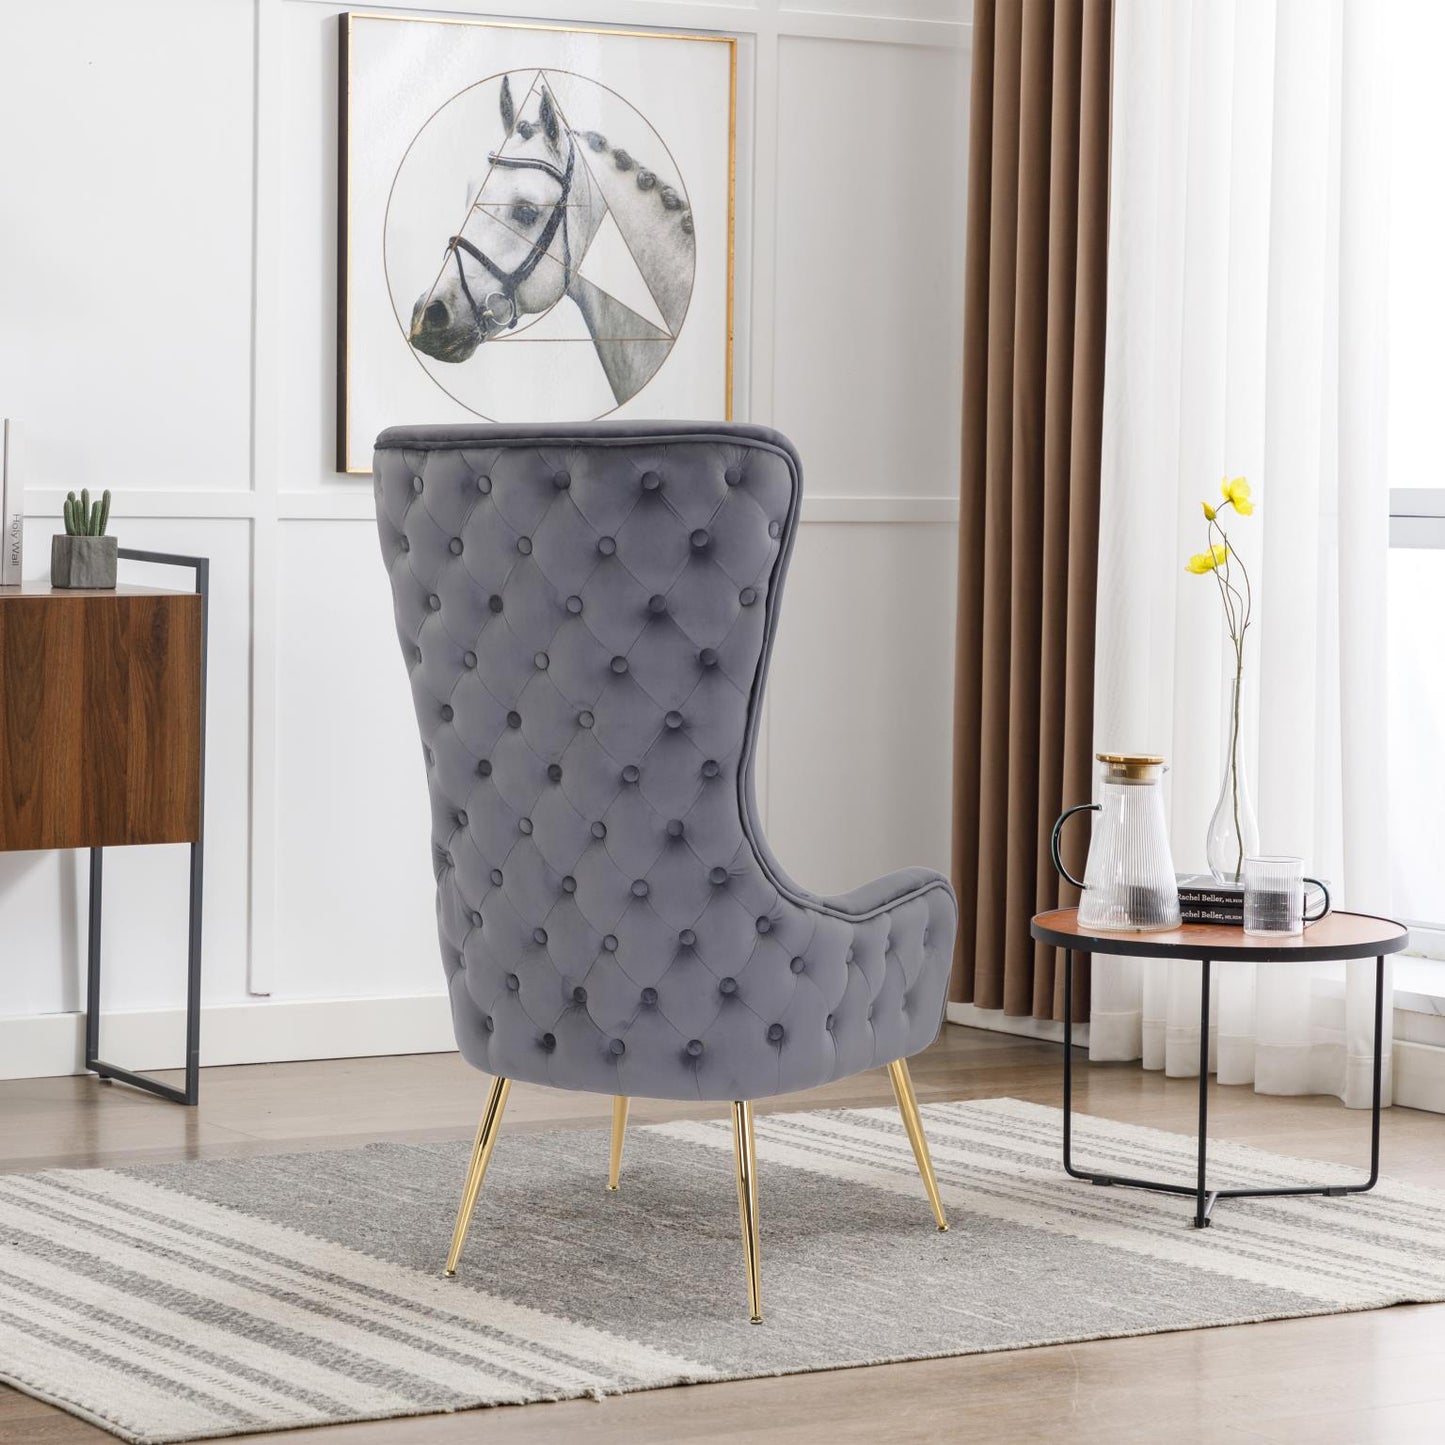 WINTER Grey Accent Chair